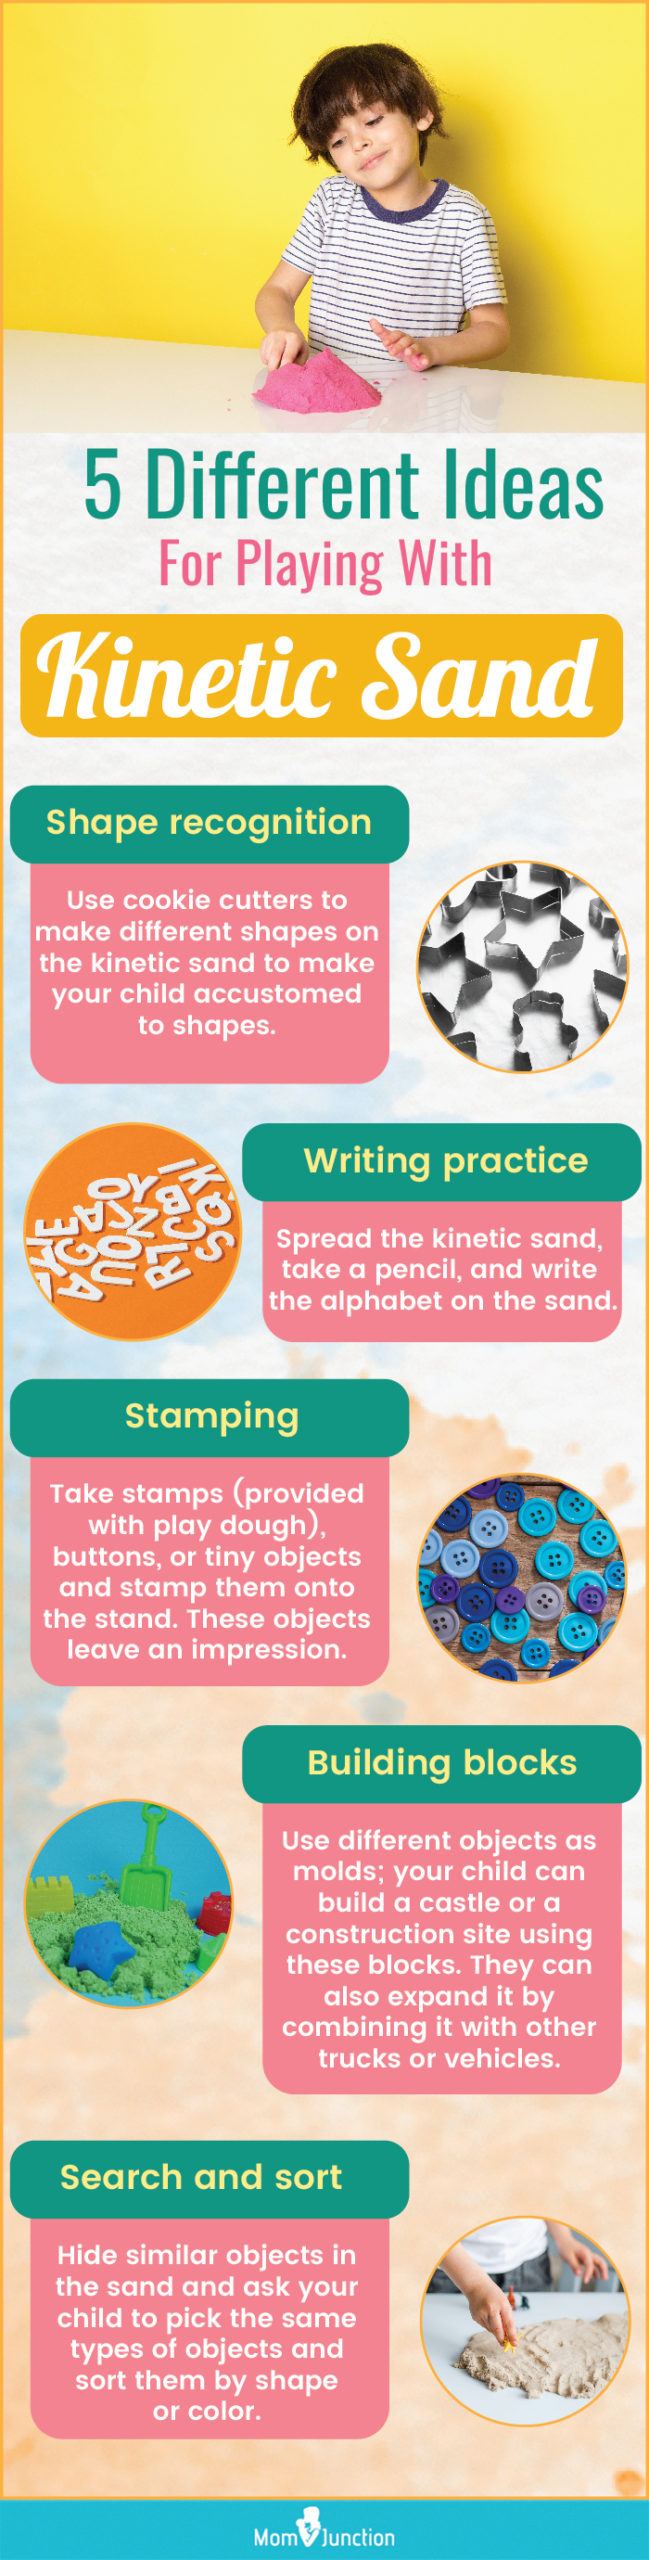 5 Different Ideas For Playing With Kinetic Sand (Infographic)